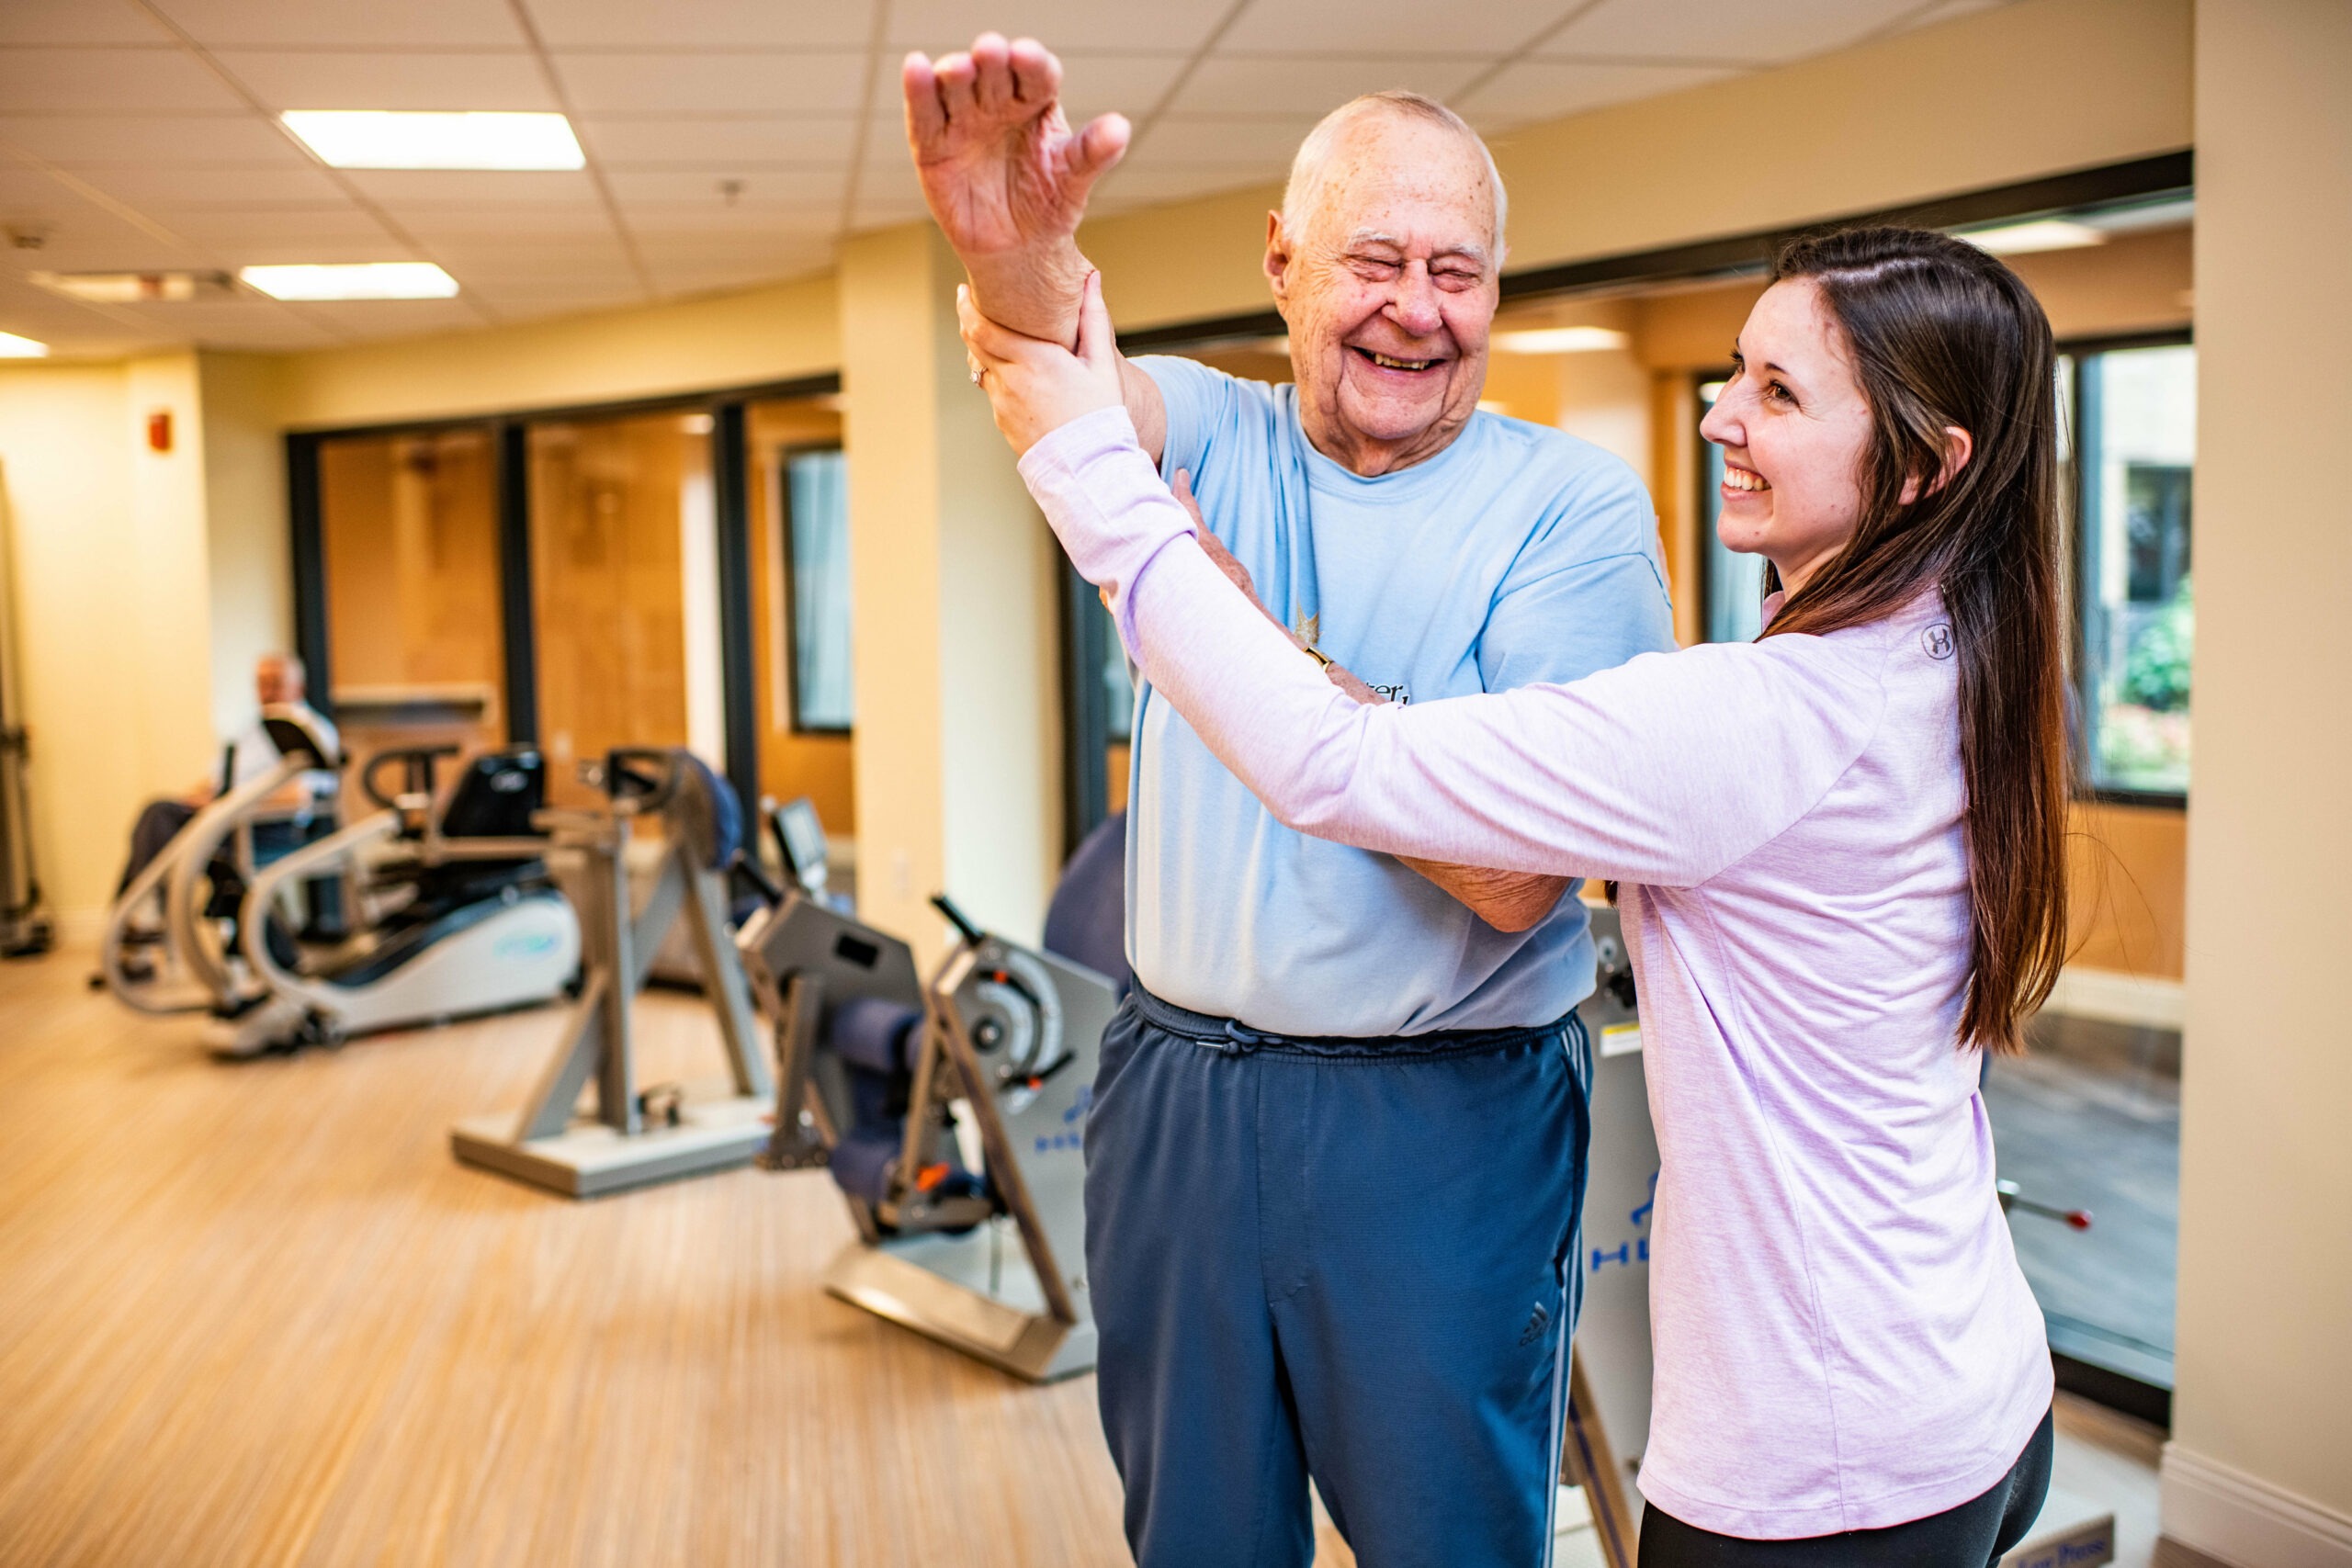 Trainer assisting elderly man with stretches at gym in rehab facility